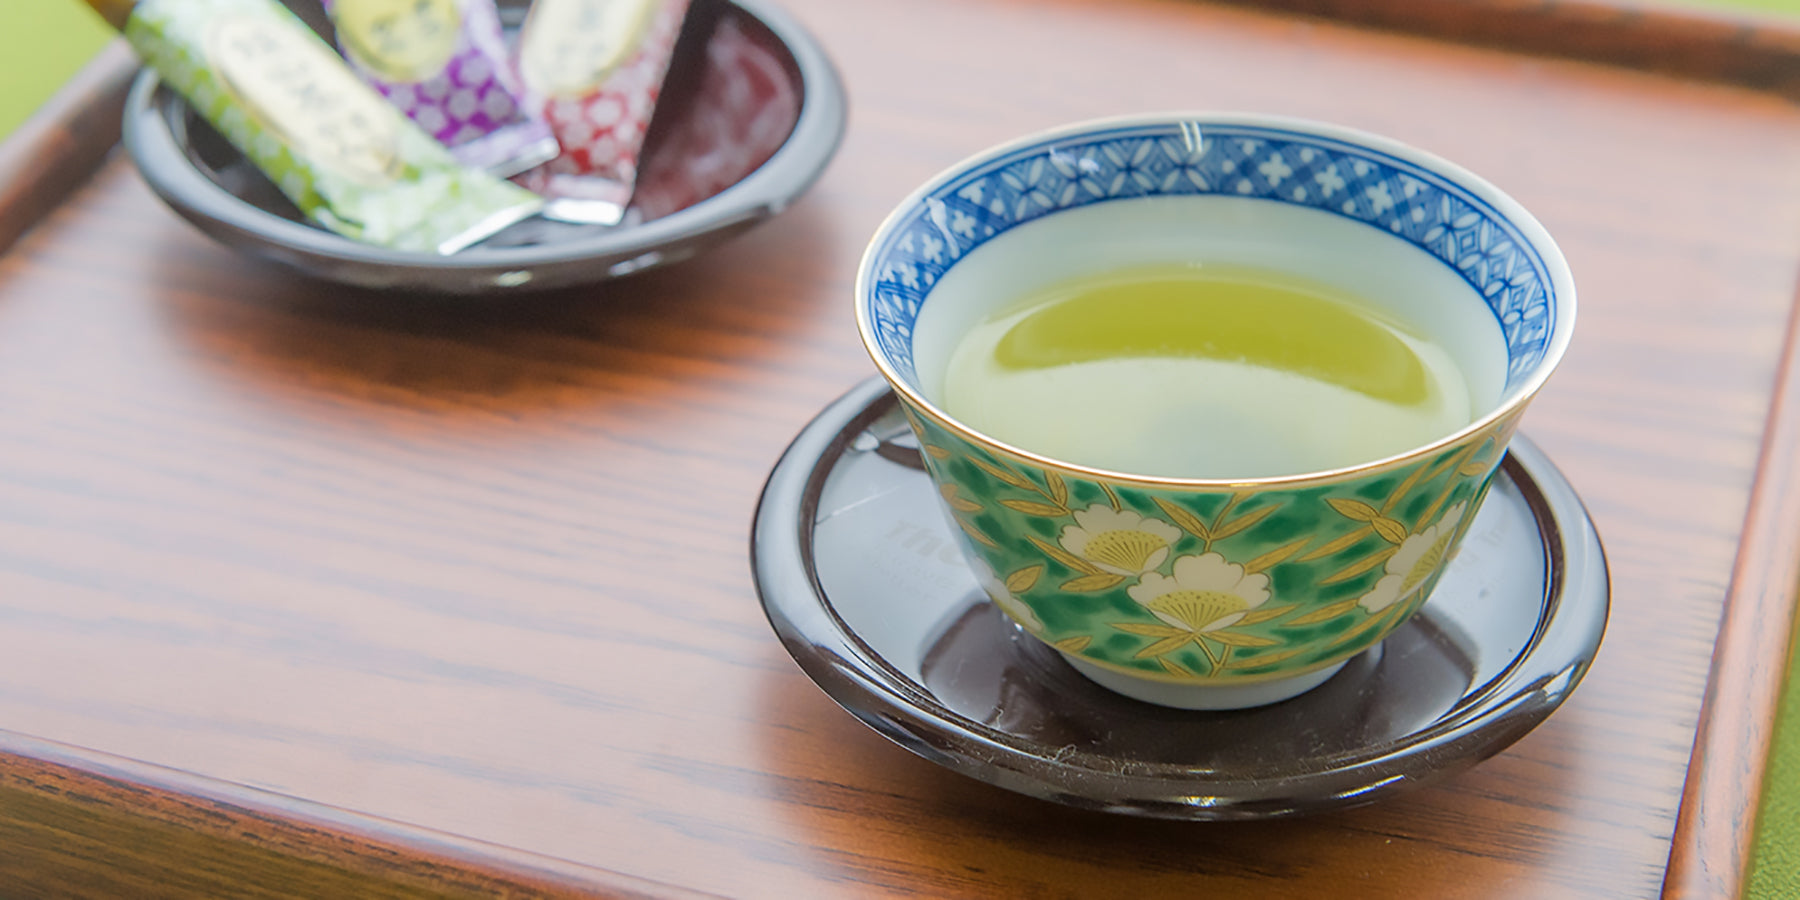 Discover our great selection of Tea & Food Selection supplies on Globalkitchen Japan.